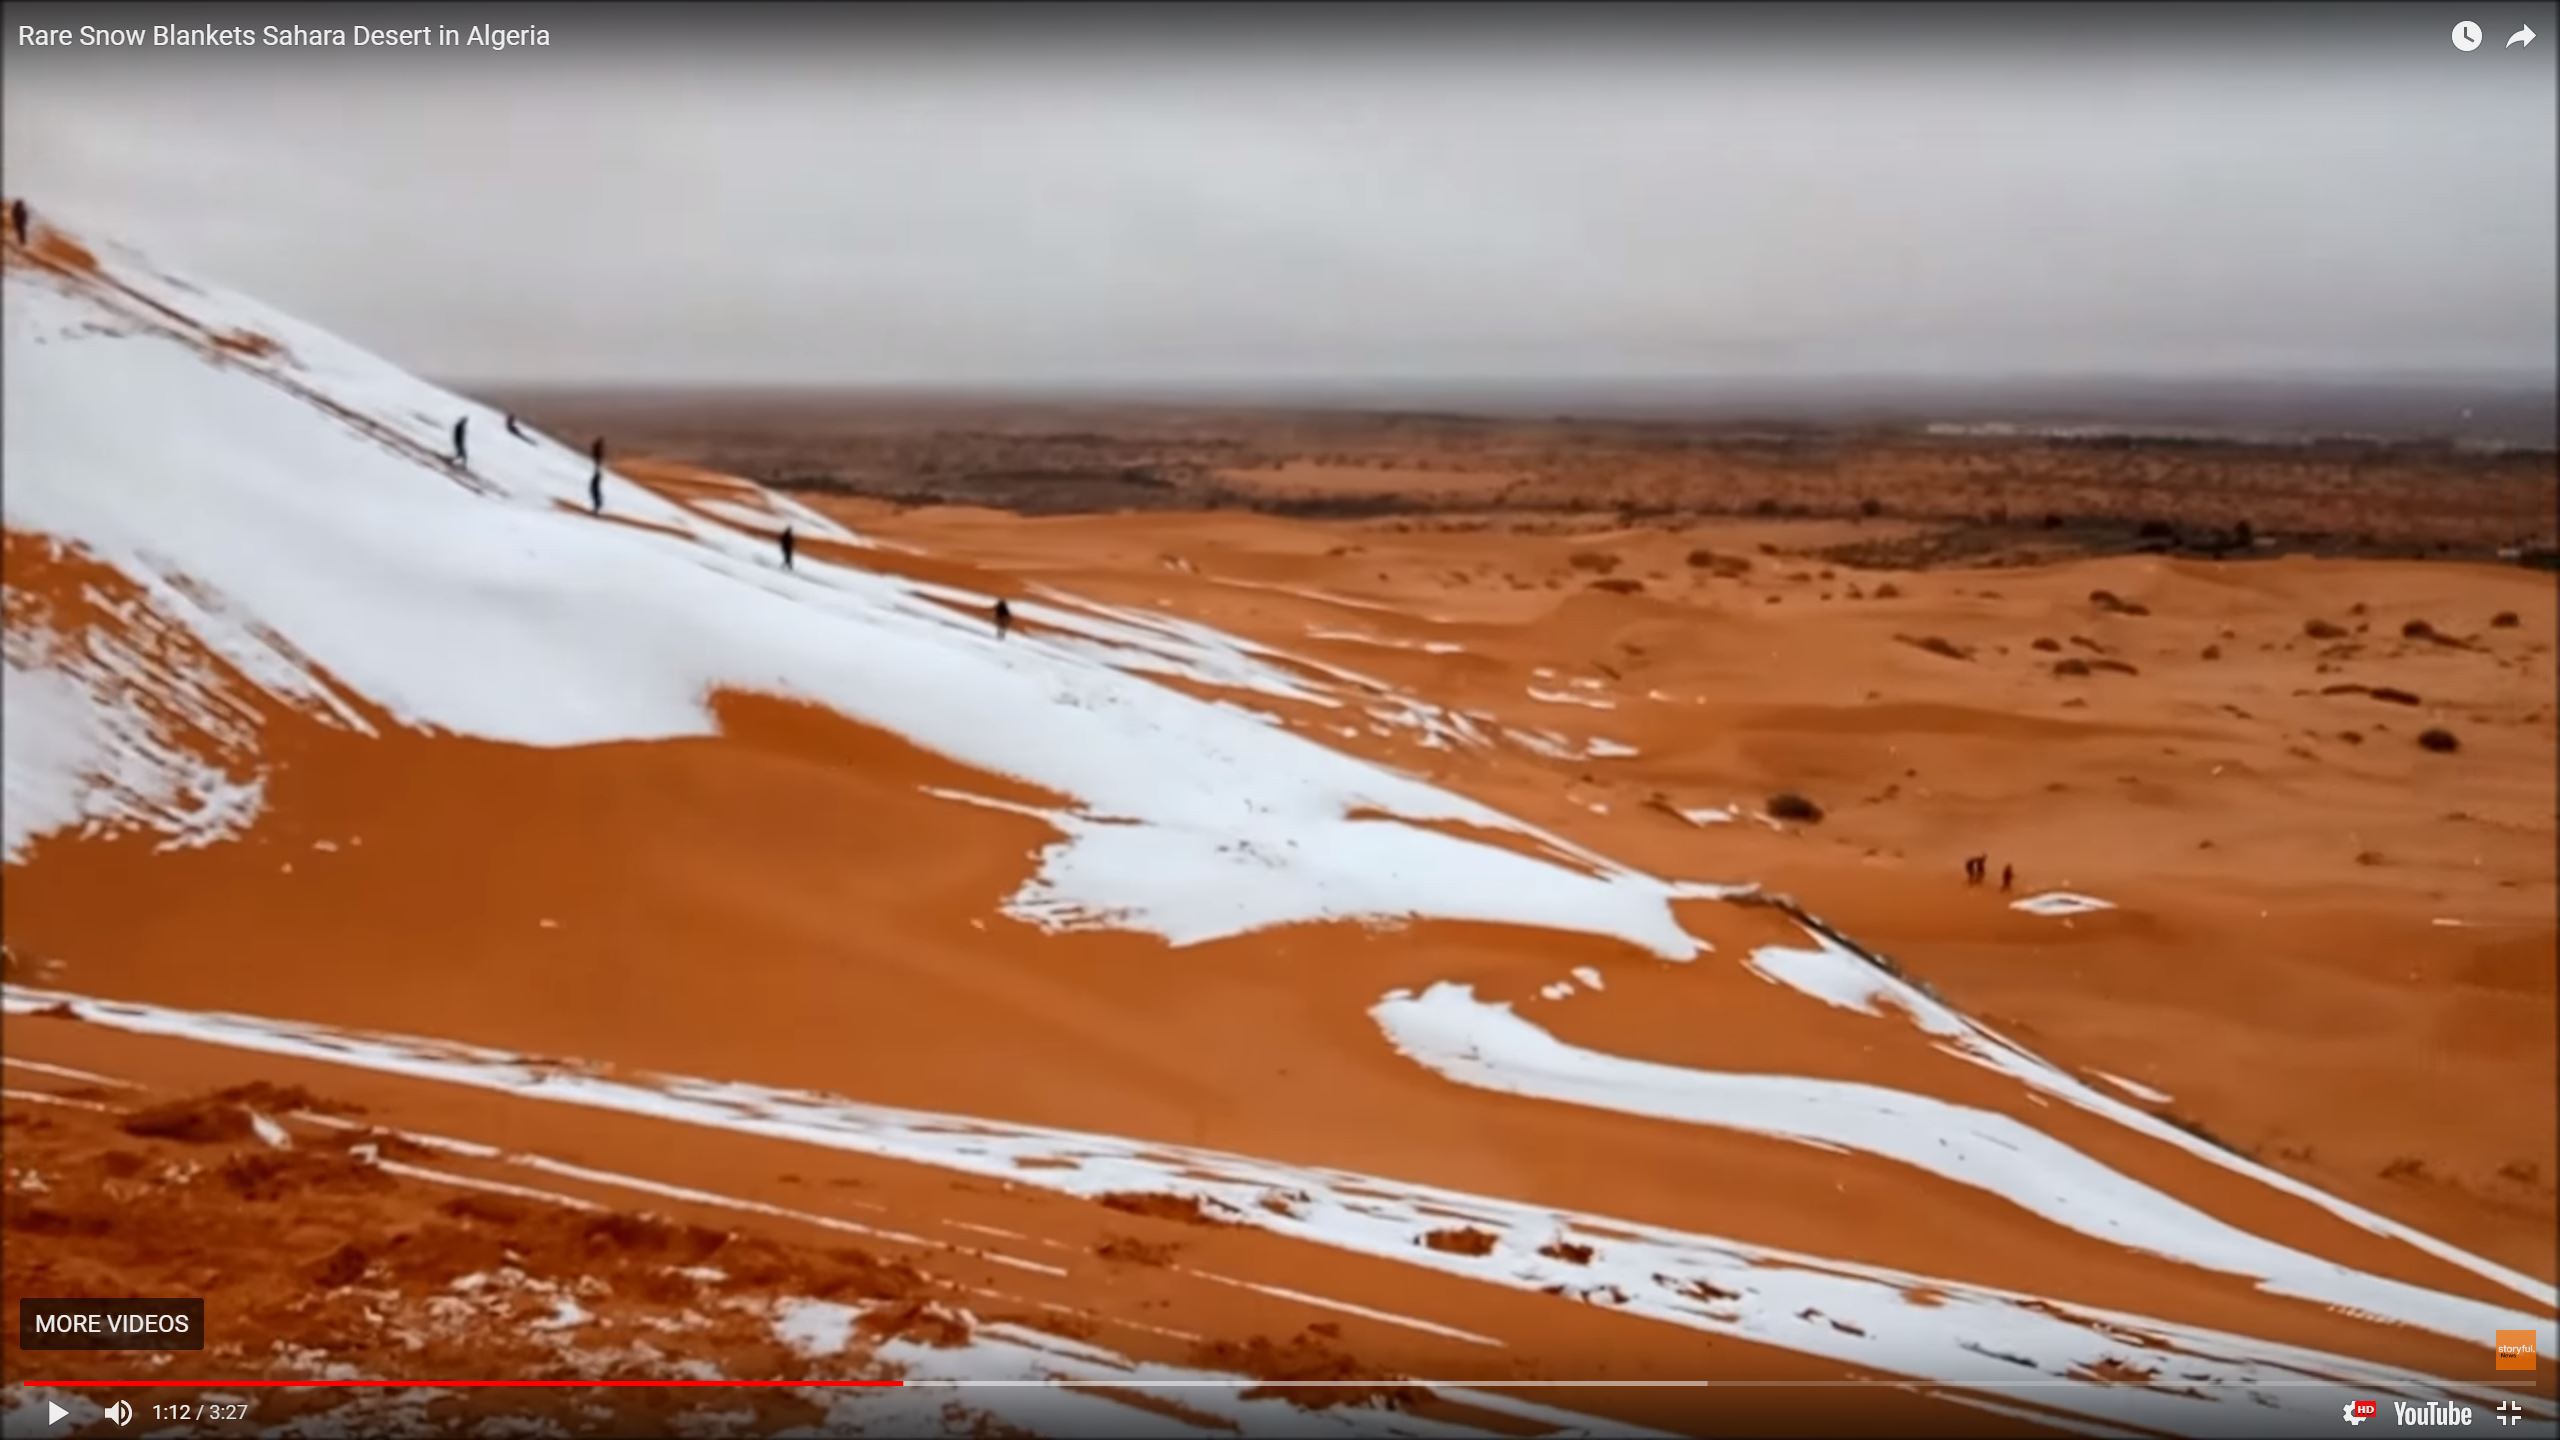 PHOTO: A rare bout of snow dusted sand dunes in the Saharan town of Ain Sefra in northwest Algeria, Jan. 7, 2018.